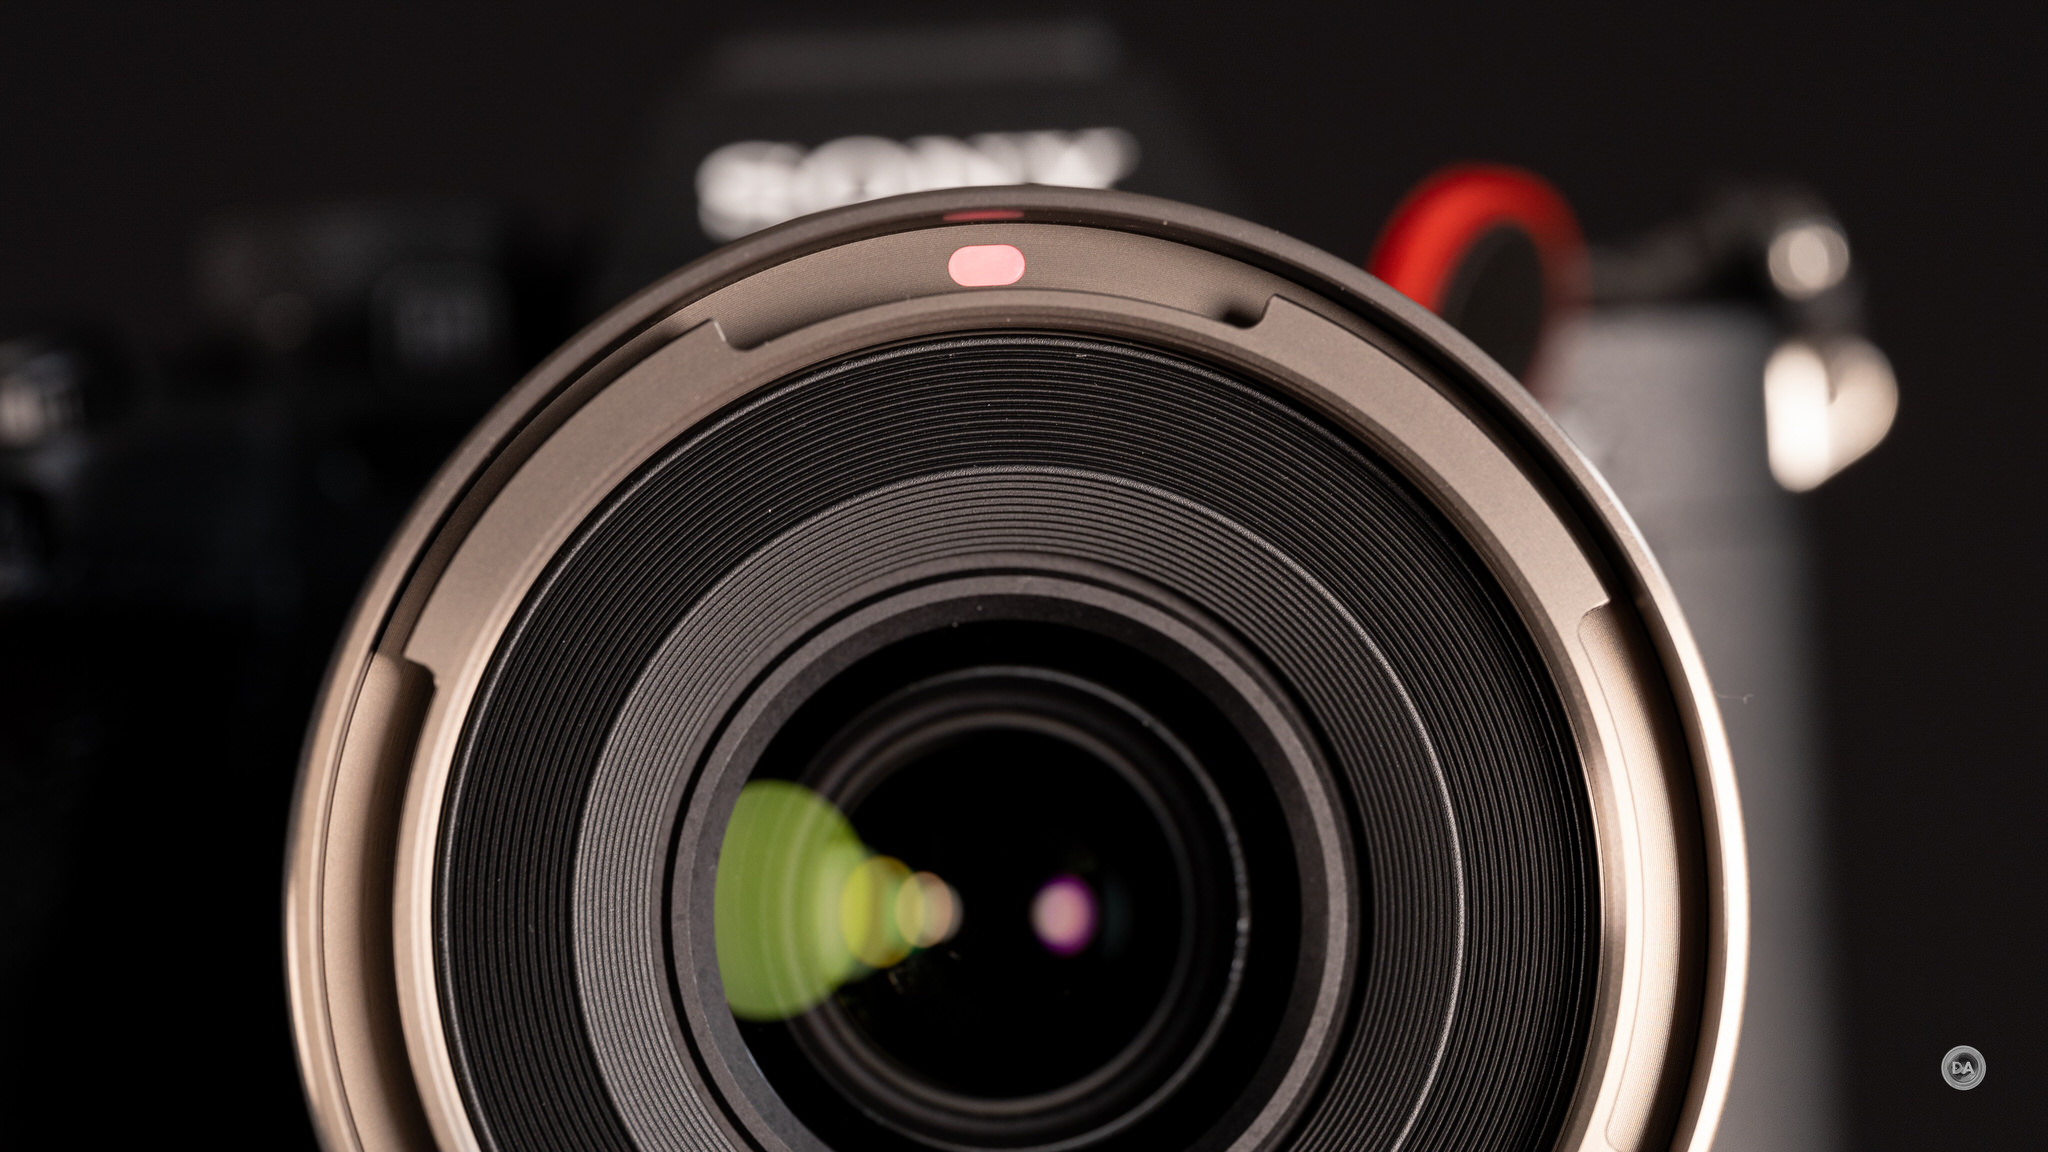 Jeff Cable's Blog: Using the Canon R6 Mark II: My initial thoughts